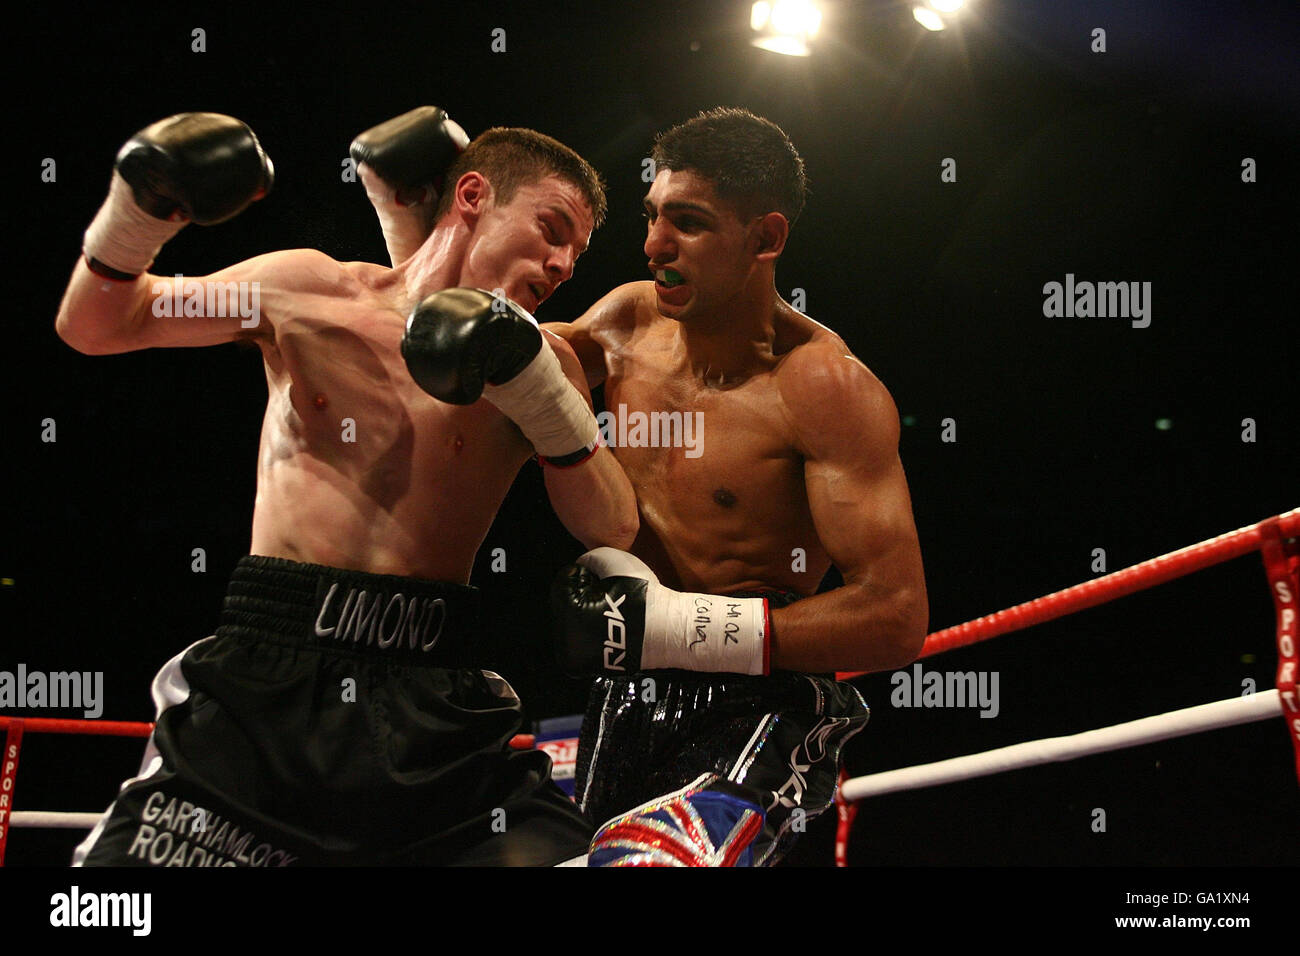 England's Amir Khan (right) in action against Scotland's Willie Limond during the Commonwealth Lightweight Title fight at the O2 Arena, London. Stock Photo